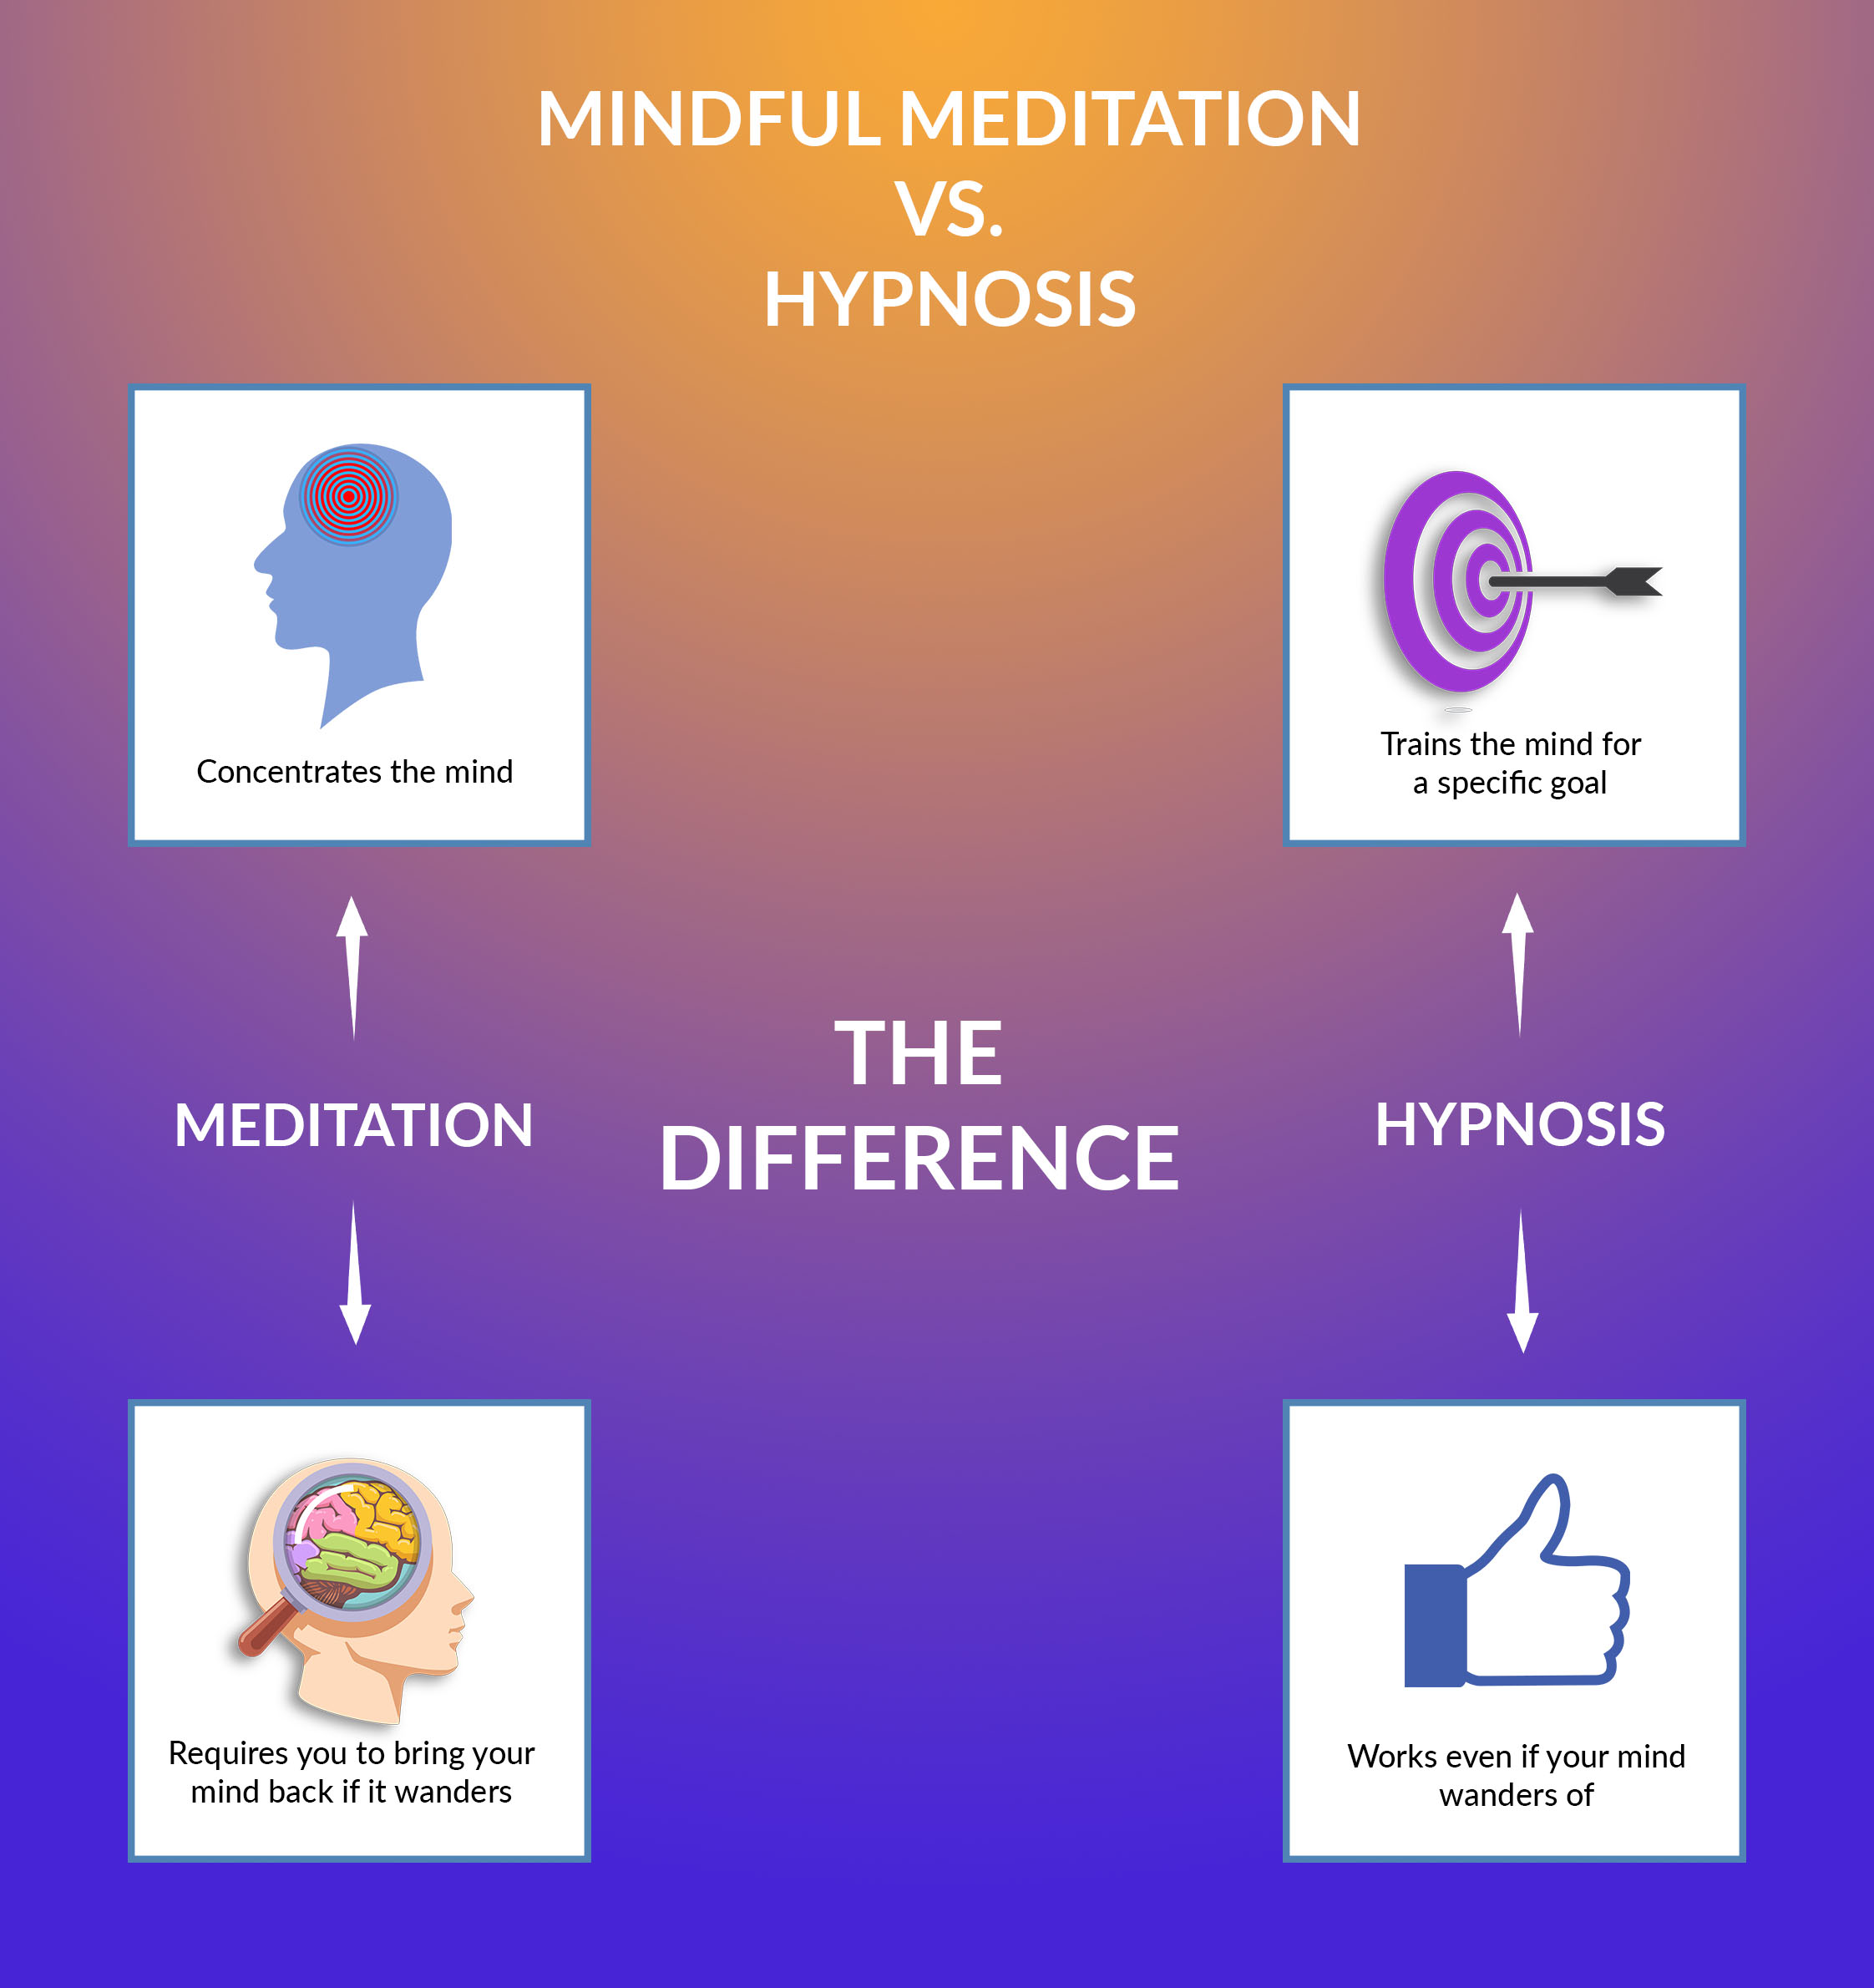 The difference between hypnotherapy and mindfulness meditation